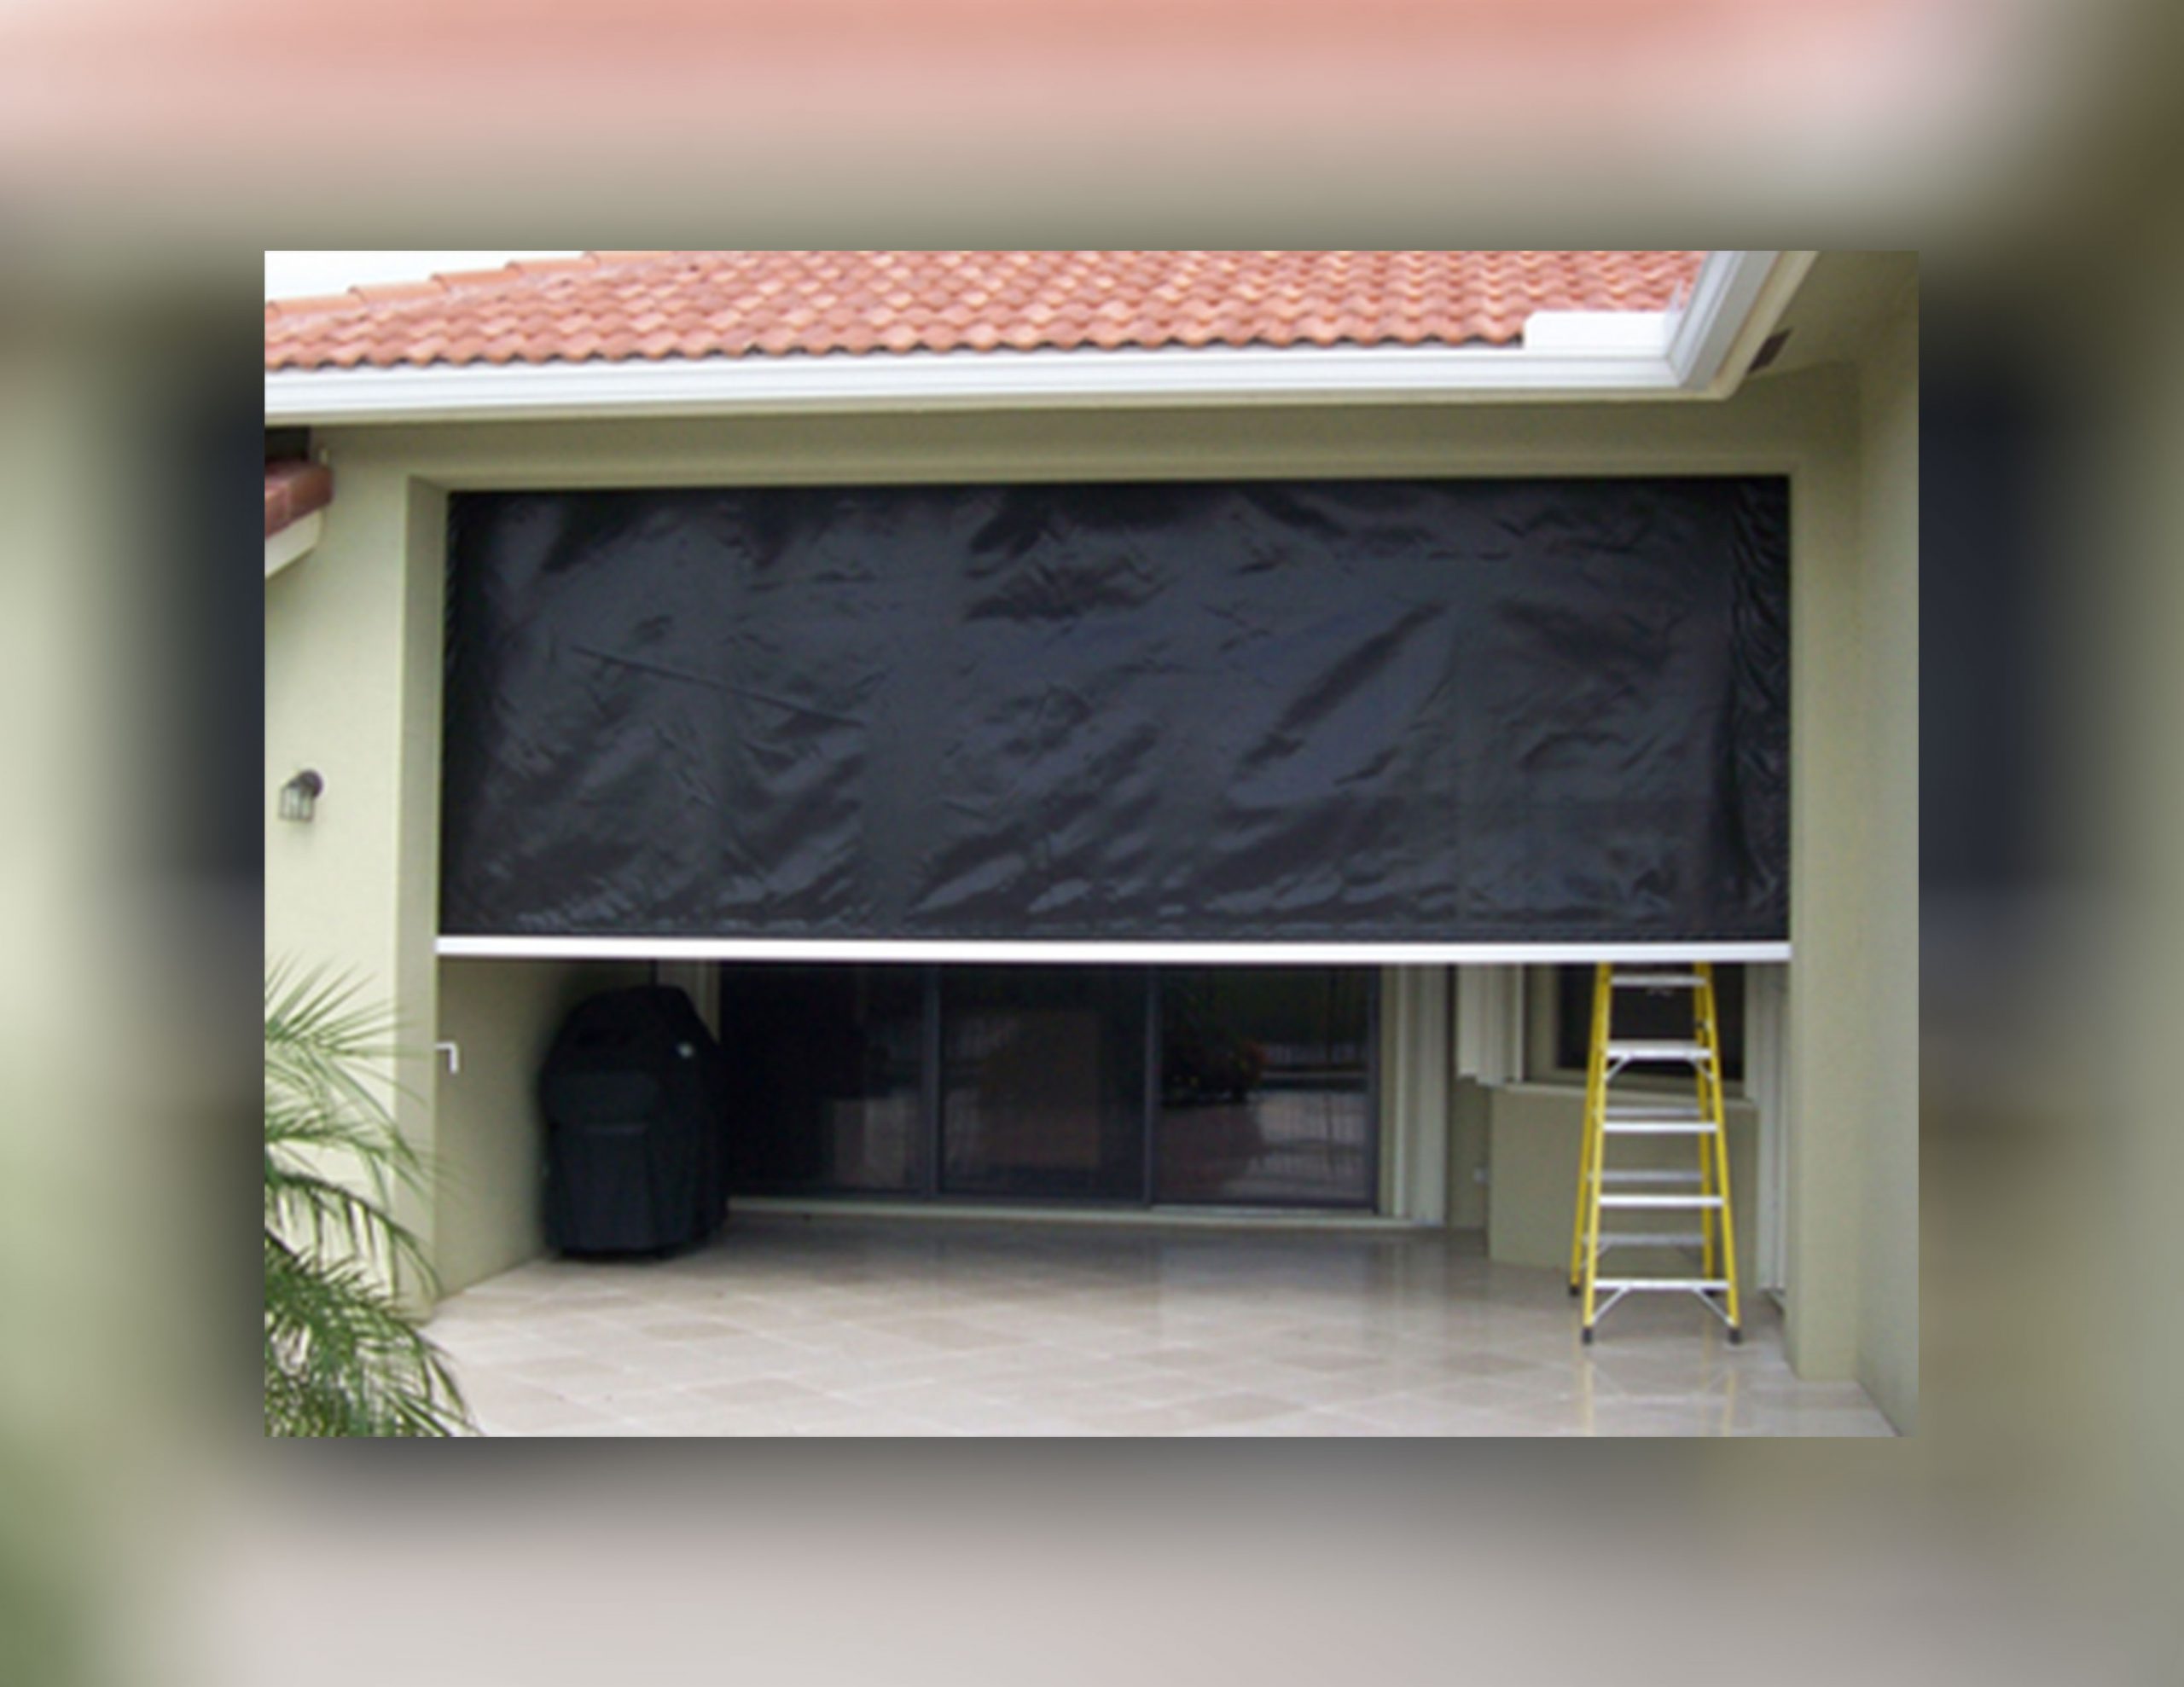 You are currently viewing Hurricane Fabric Screens in Southwest Florida